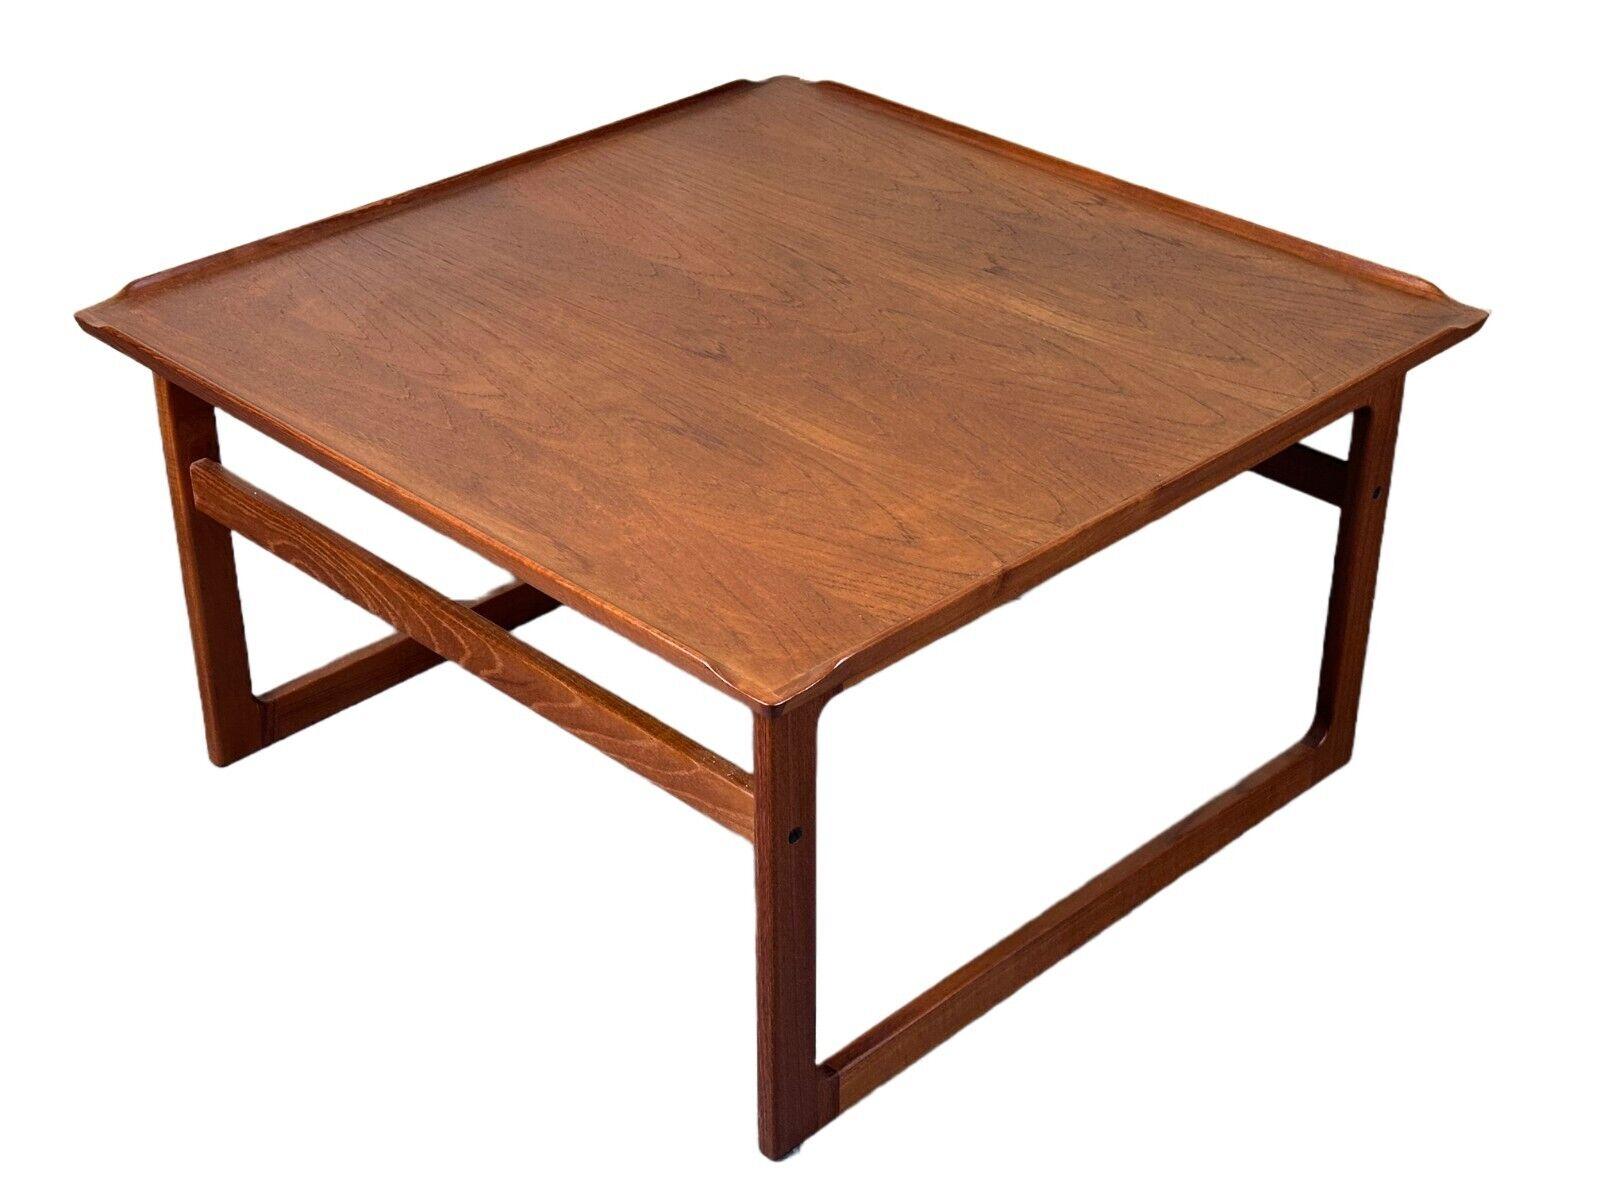 60s 70s teak coffee table Kubus by Jalk Vodder Andersen for Dyrlund Denmark

Object: coffee table

Manufacturer: Dyrlund

Condition: good - vintage

Age: around 1960-1970

Dimensions:

80cm x 80cm x 44.5cm

Material: teak

Other notes:

The pictures